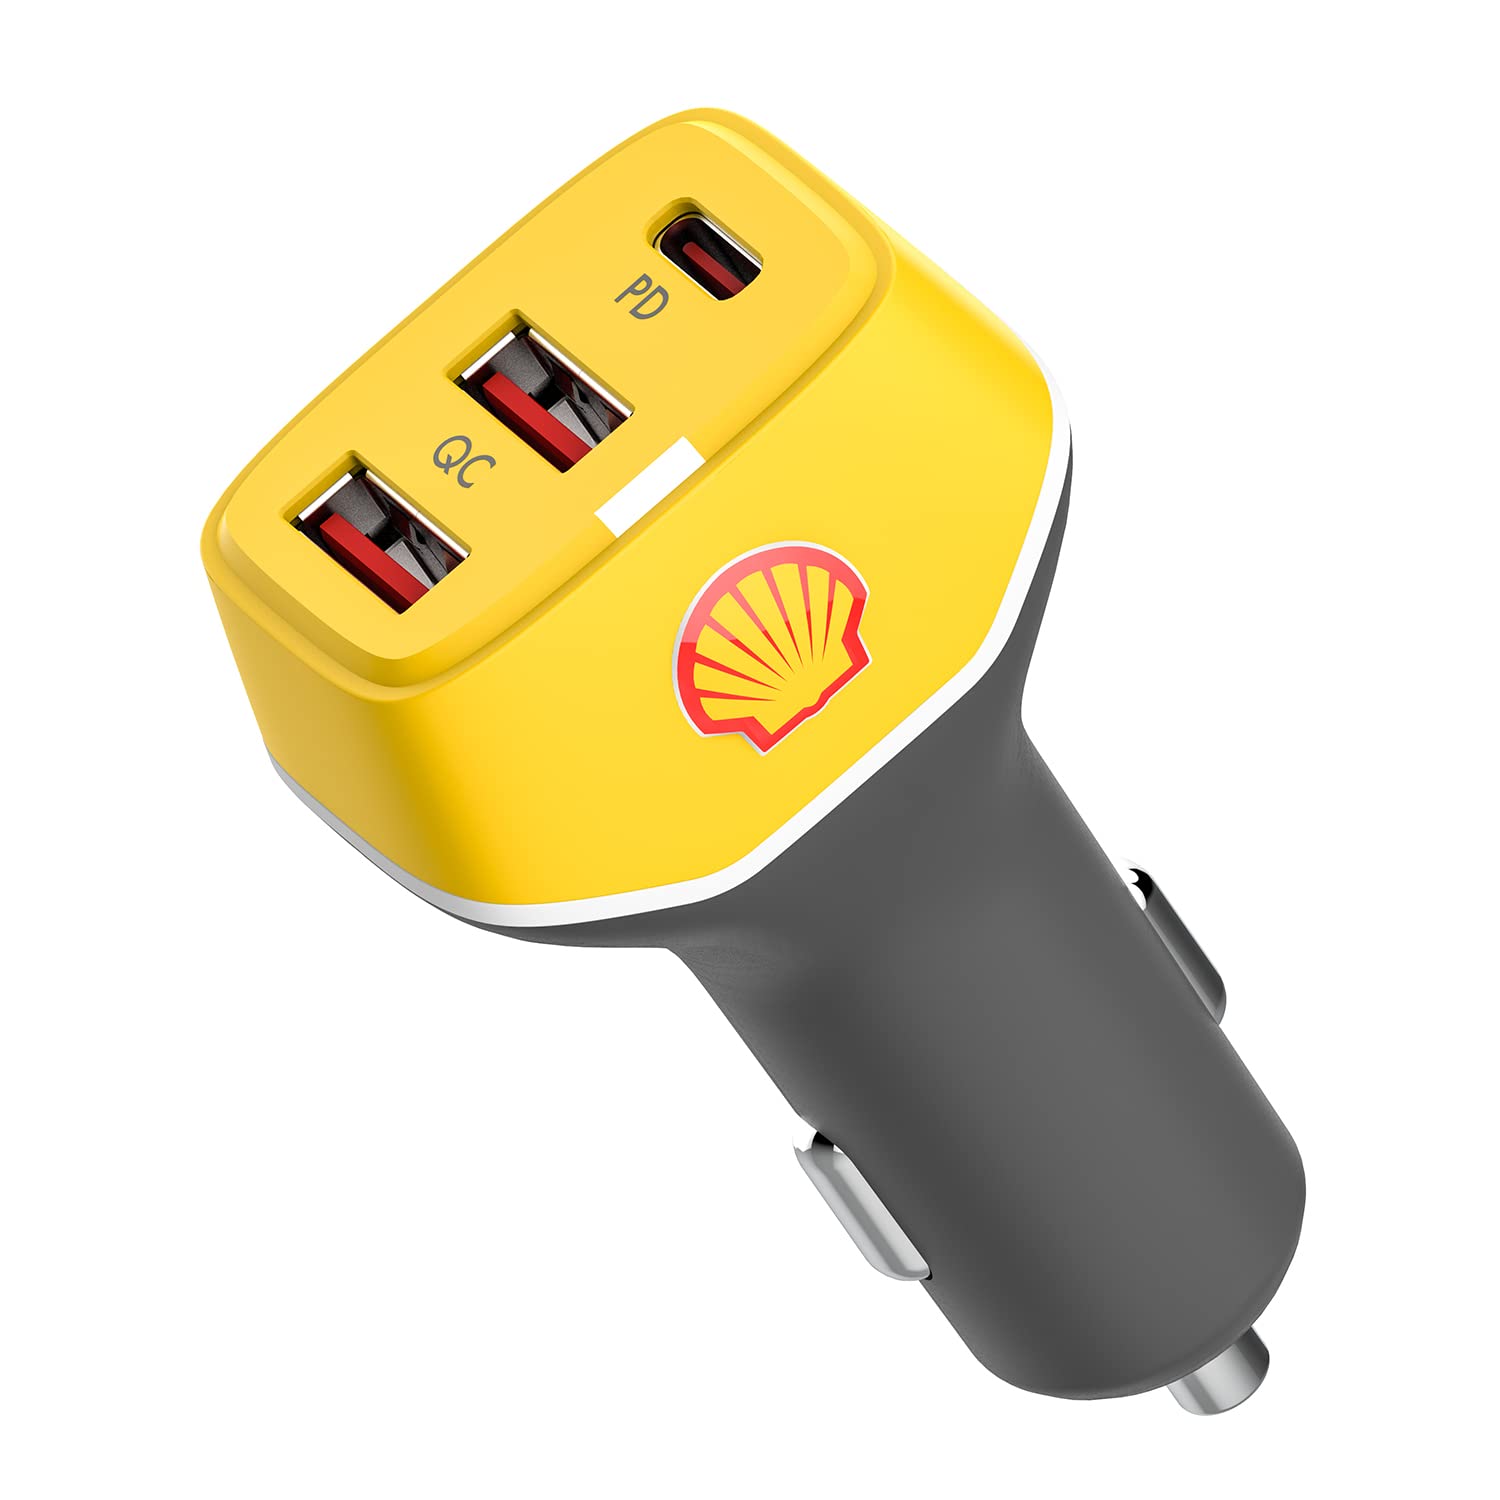 Shell Car Charger USB C, 63W 3 Port iPhone Car Charger Fast Charging,45W PD USB C for iPhone 13 /Pro/Max/Mini, iPad Pro/Air/Mini, MacBook Air/Pro, Google Pixel, Tablets, GPS.